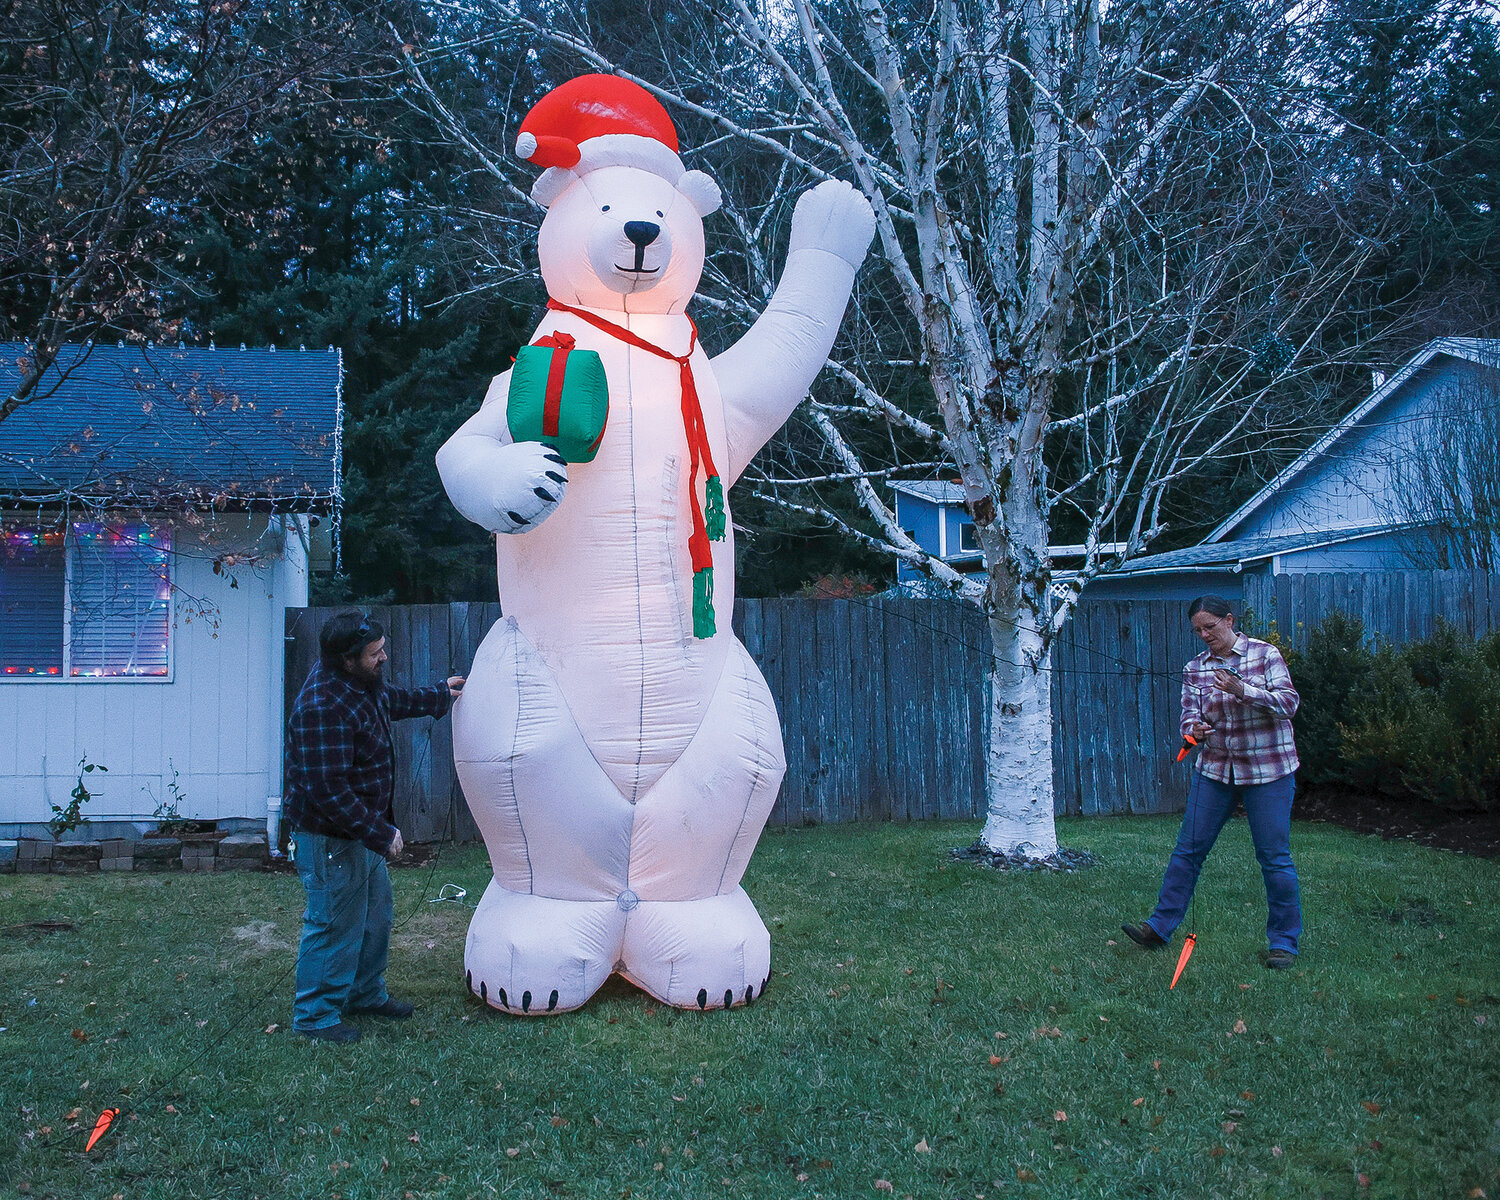 Toby Schultz, left, and his wife, Charlotte Schultz, put up their 14-foot inflatable polar bear on Nov. 29. It has become a tradition and sign of Christmas for the family.